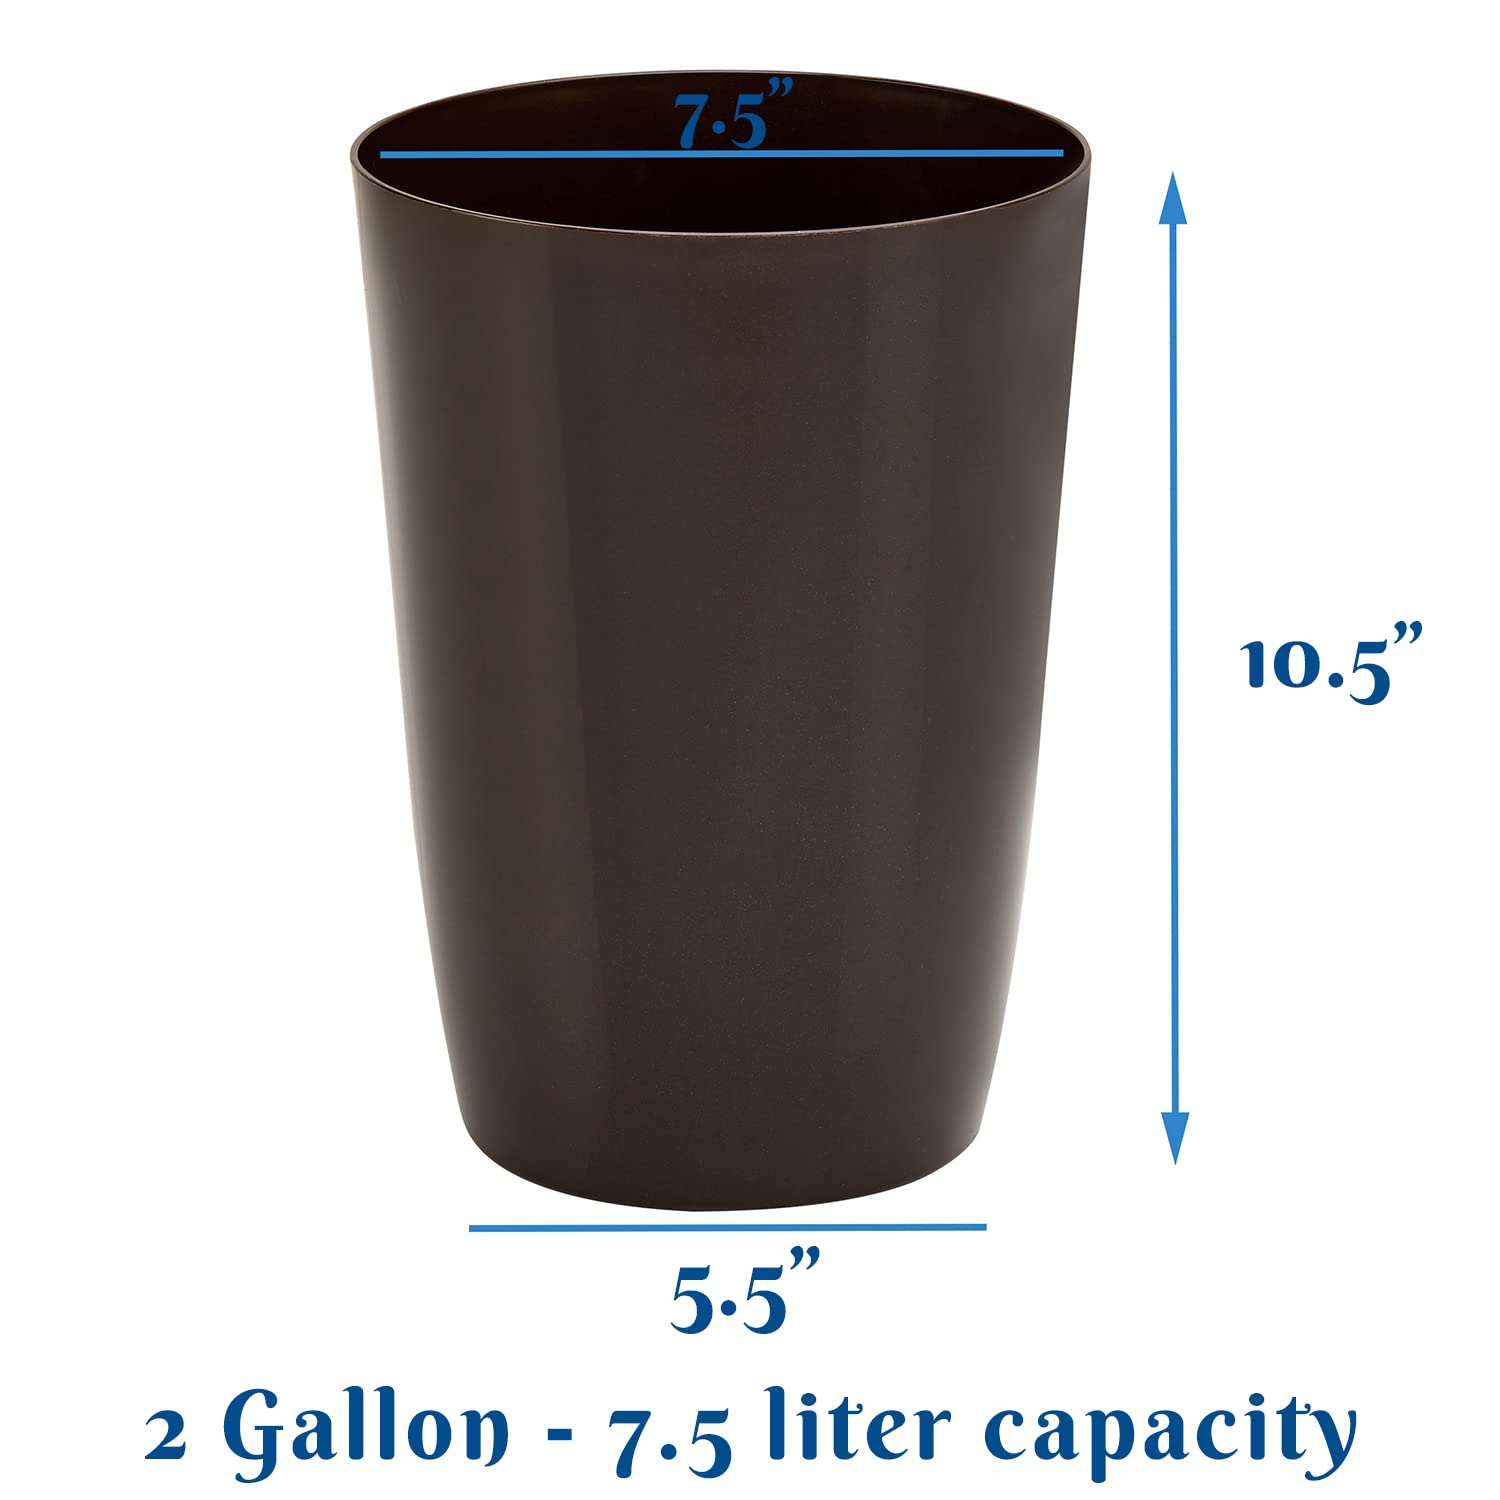 Small Trash Can – Open Top Garbage Cans for Kitchen, Office, Dorm, Bathroom, etc. –Waste Can for Compact/Tight Spaces – The Perfect Bathroom Trash Can - 2 Gallon Trash Bin – Glossy Metalic Dark Brown